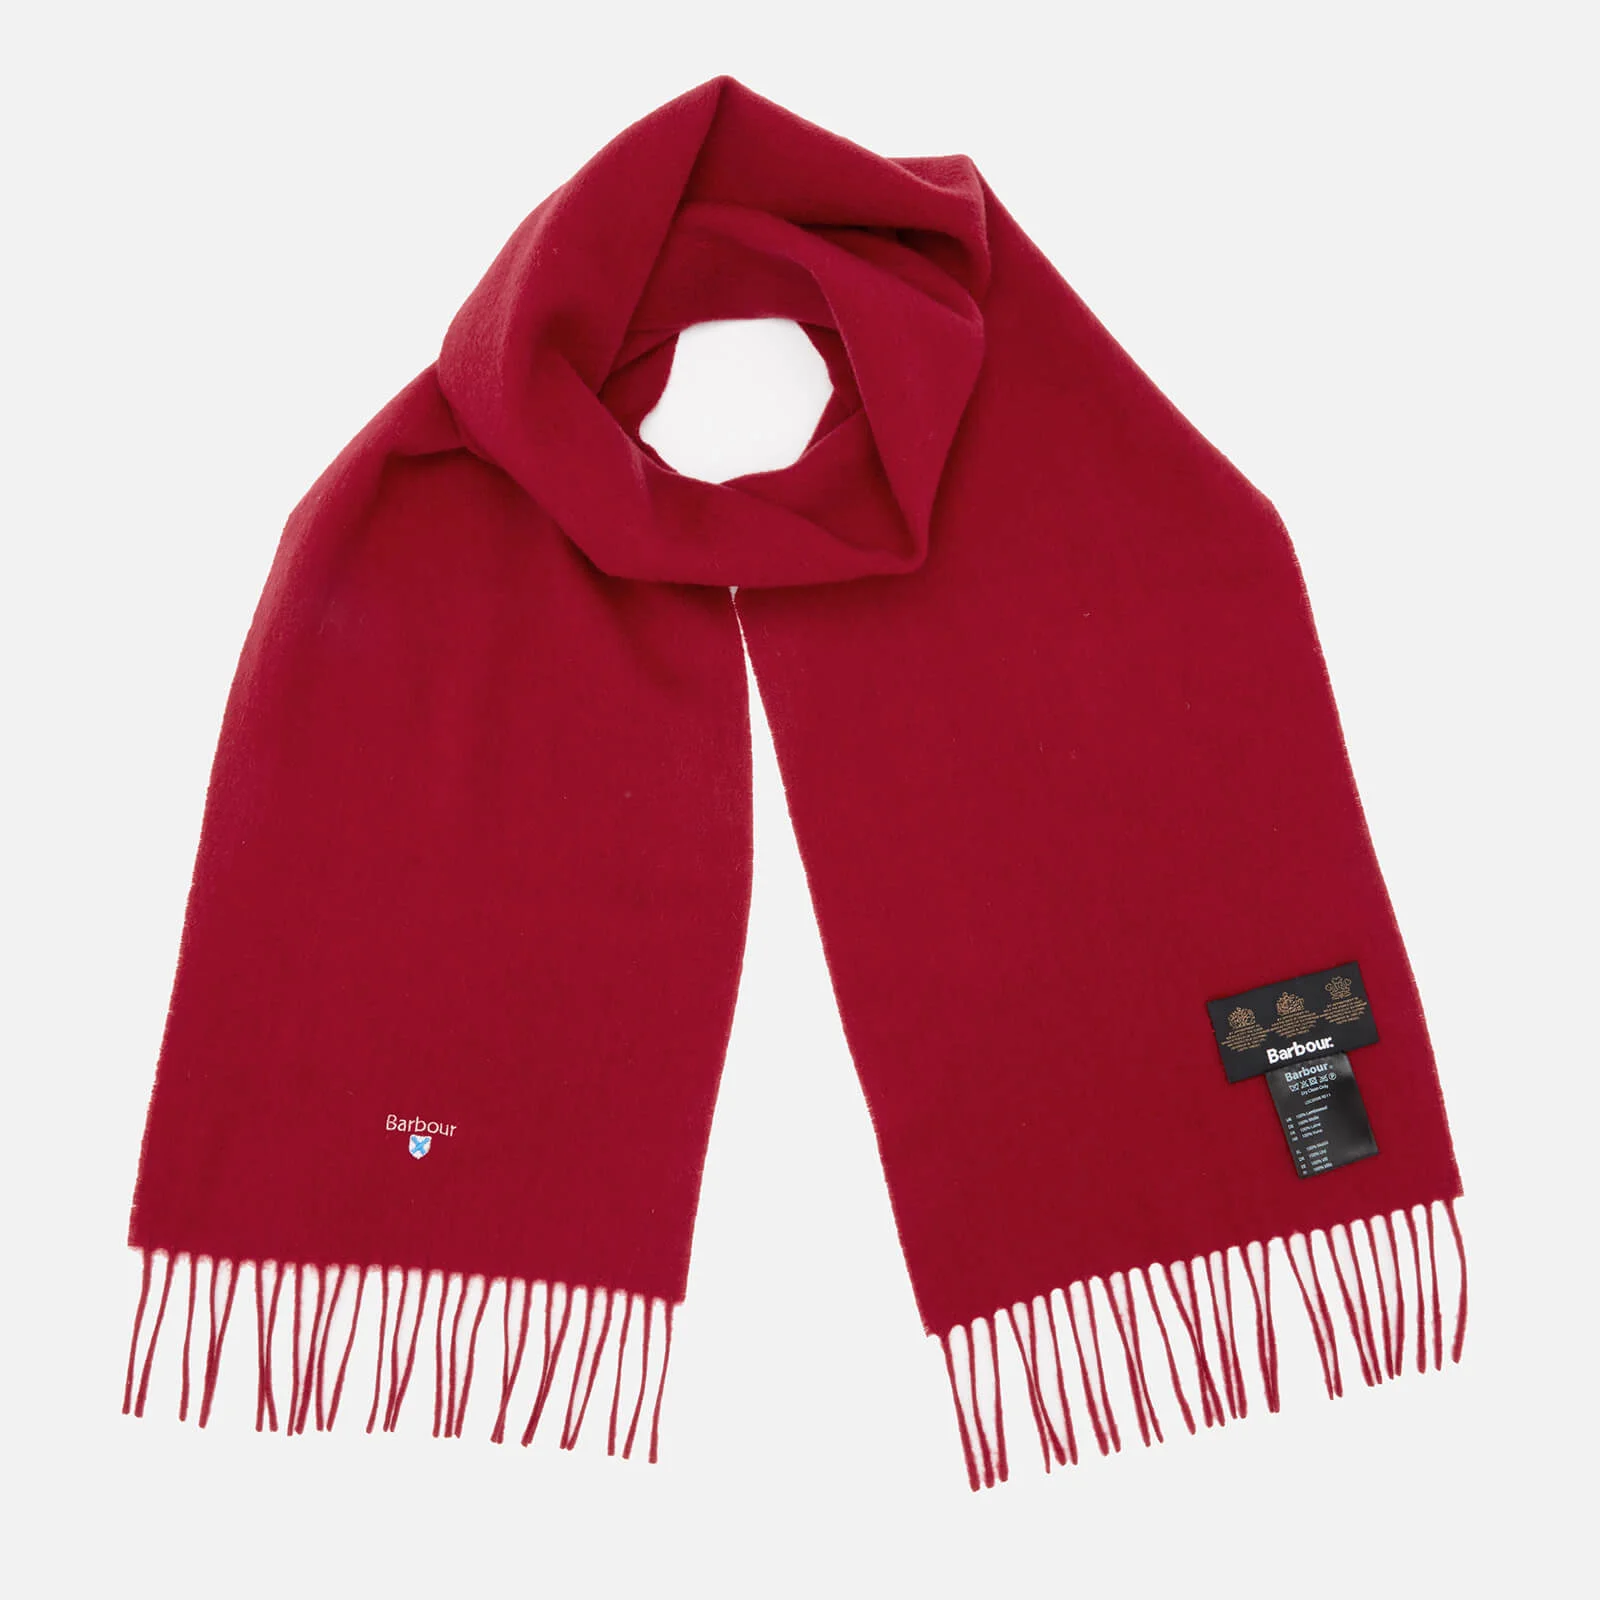 Barbour Men's Plain Lambswool Scarf - Red Image 1